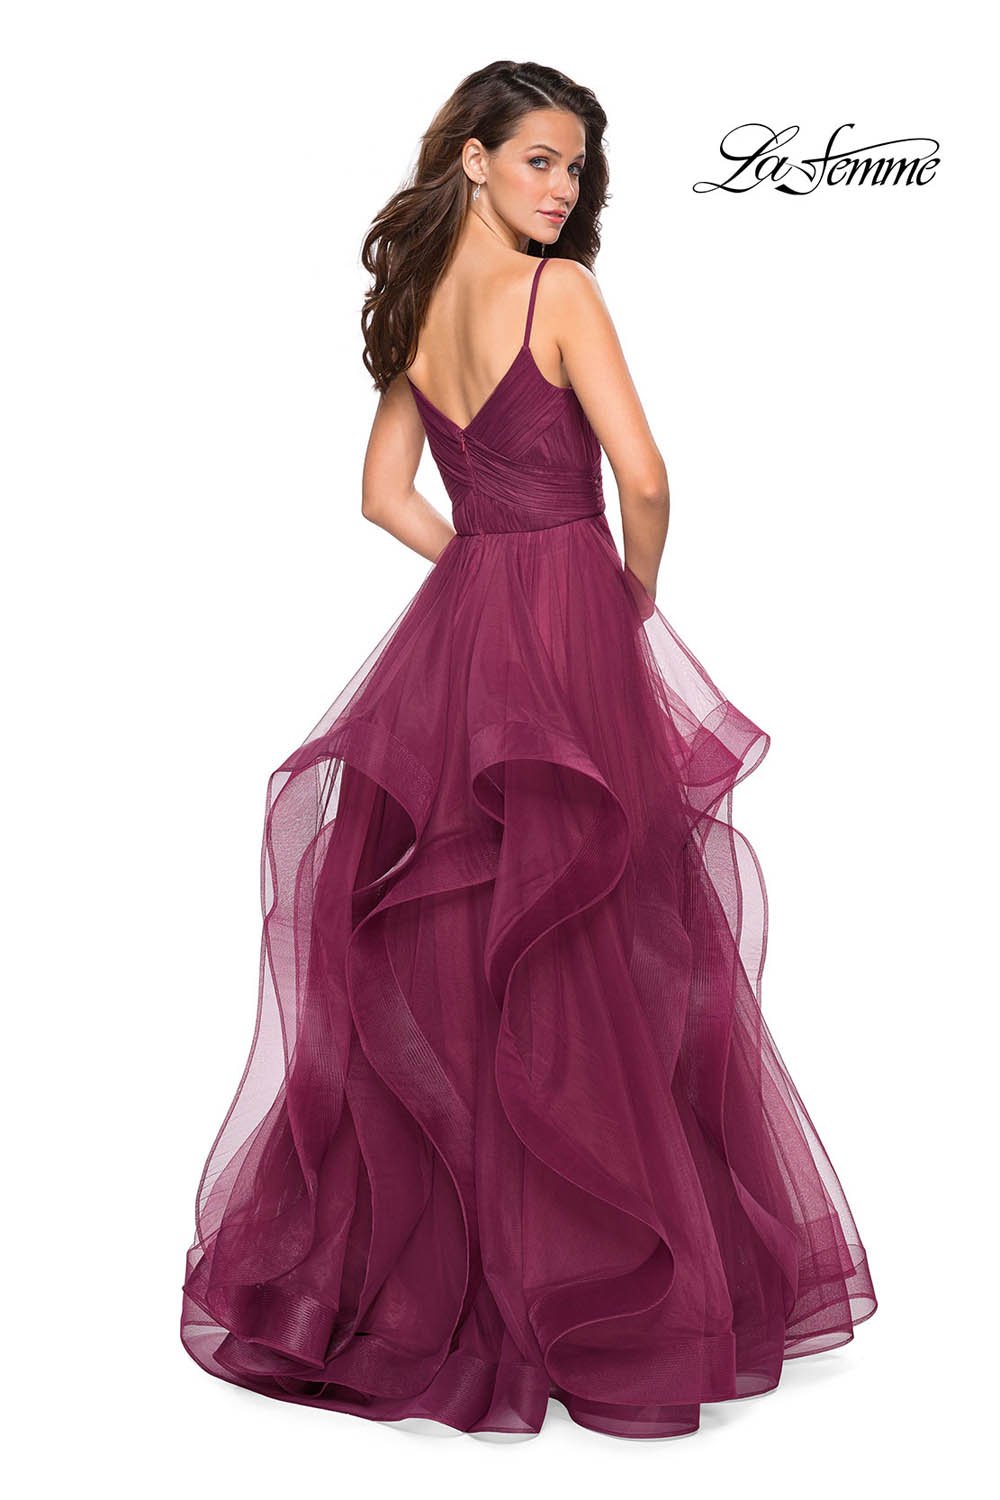 La Femme 27223 dress images in these colors: Blush, Dark Berry, Navy.